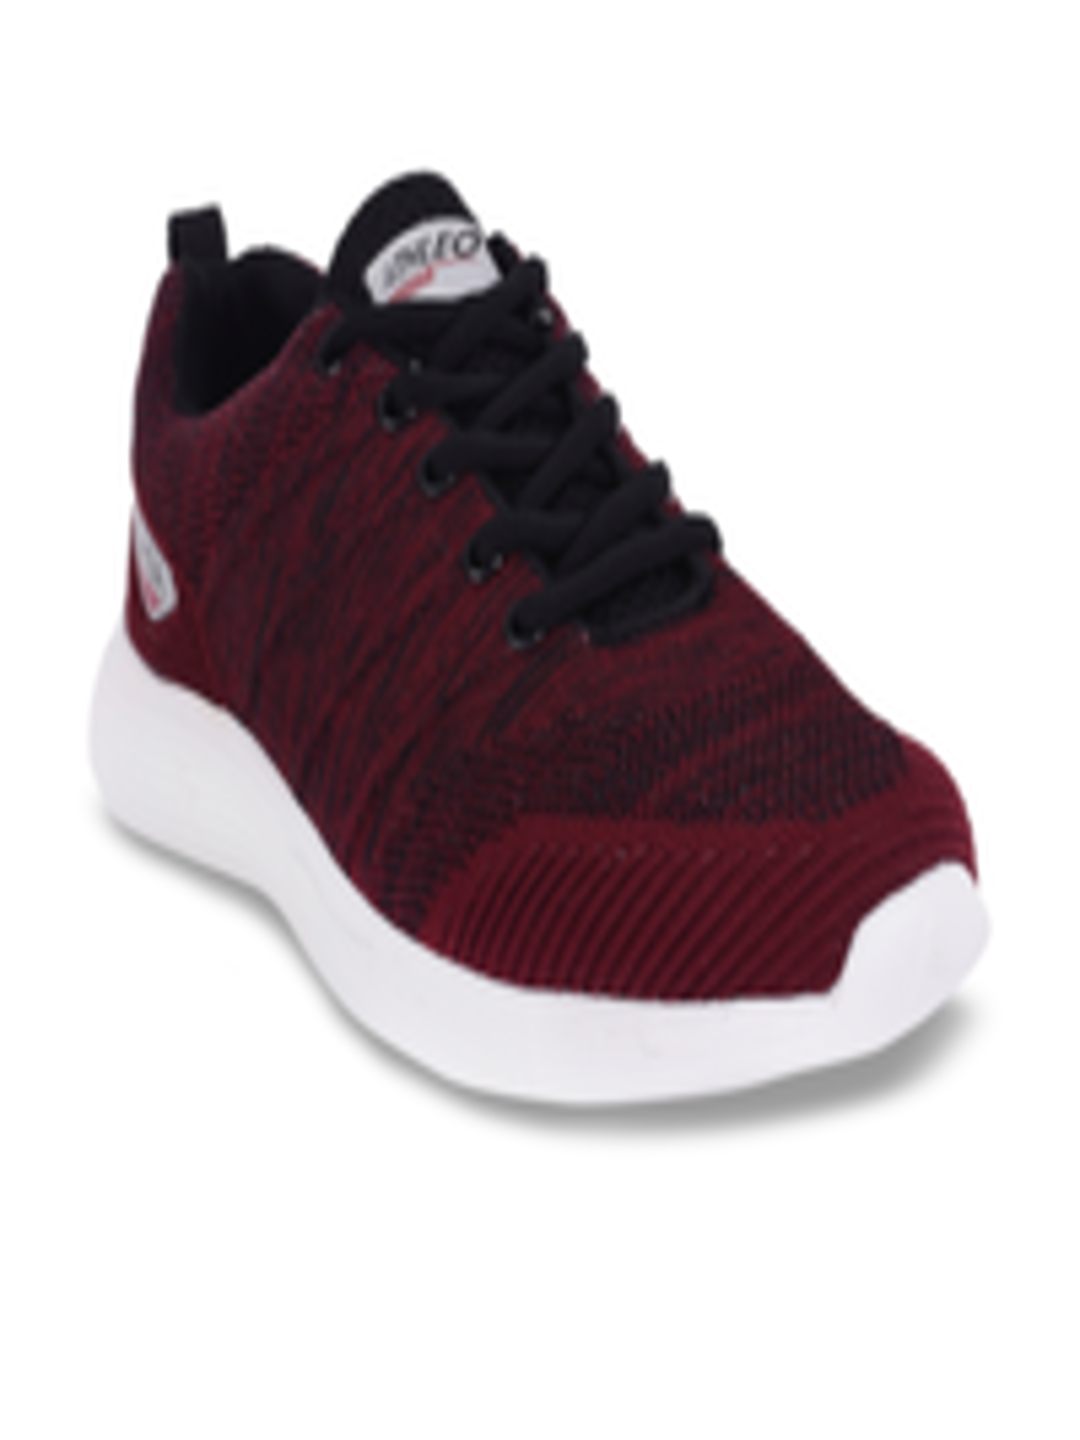 Buy Action Men Maroon Running Shoes Sports Shoes for Men